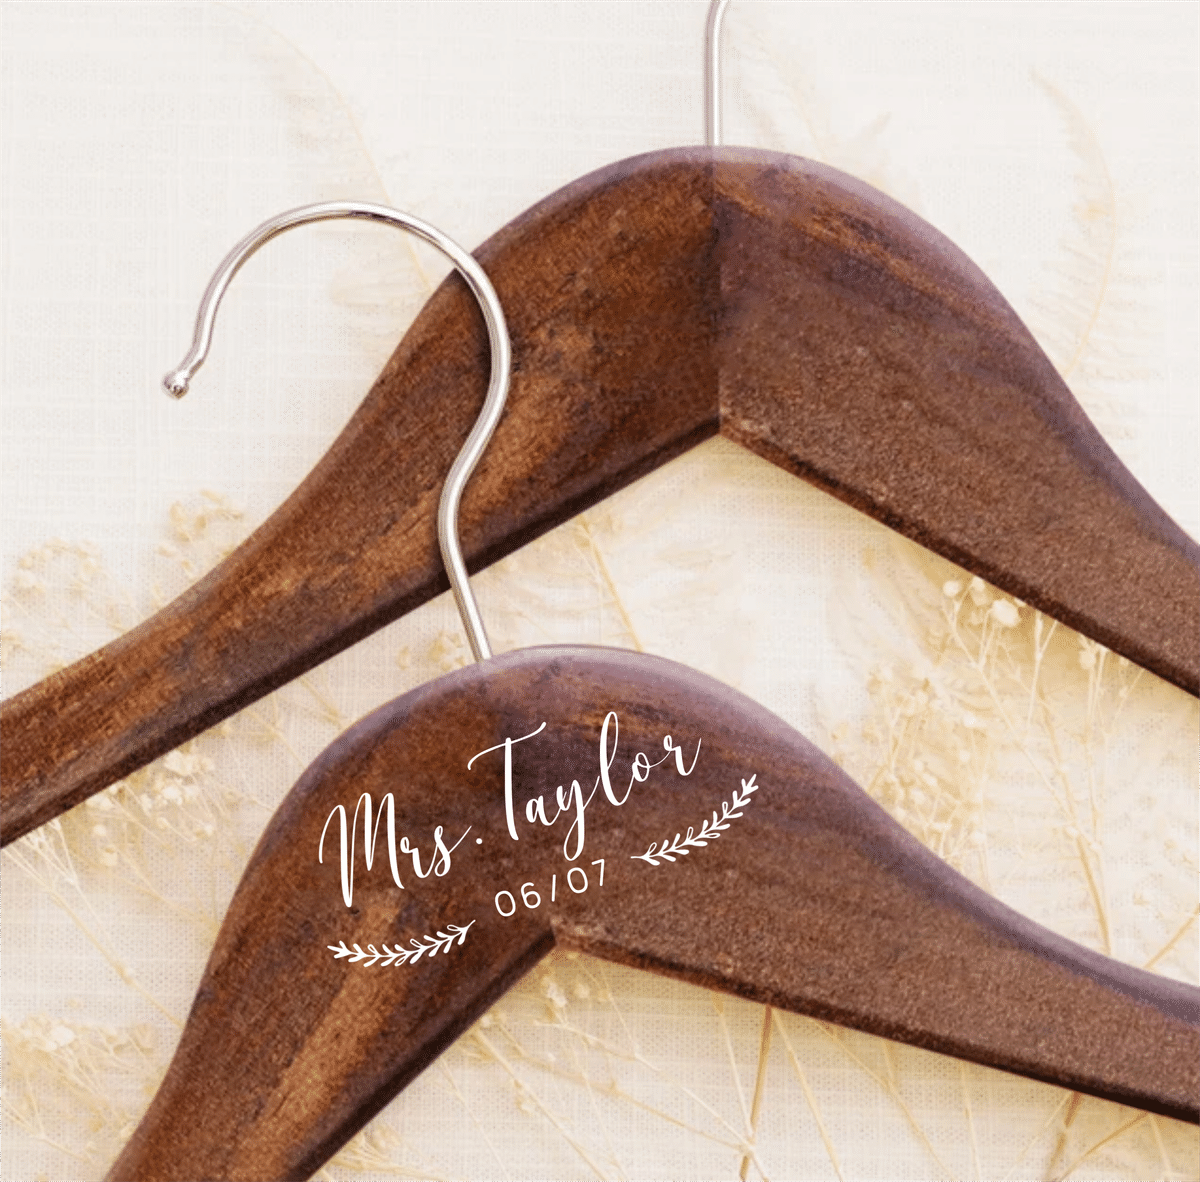 Wedding Event New Listing - Custom Bride & Bridesmaid Hanger - Bridal Shower Gift, Wedding Gifts, Bride to be gifts, Bridesmaid Gifts_2